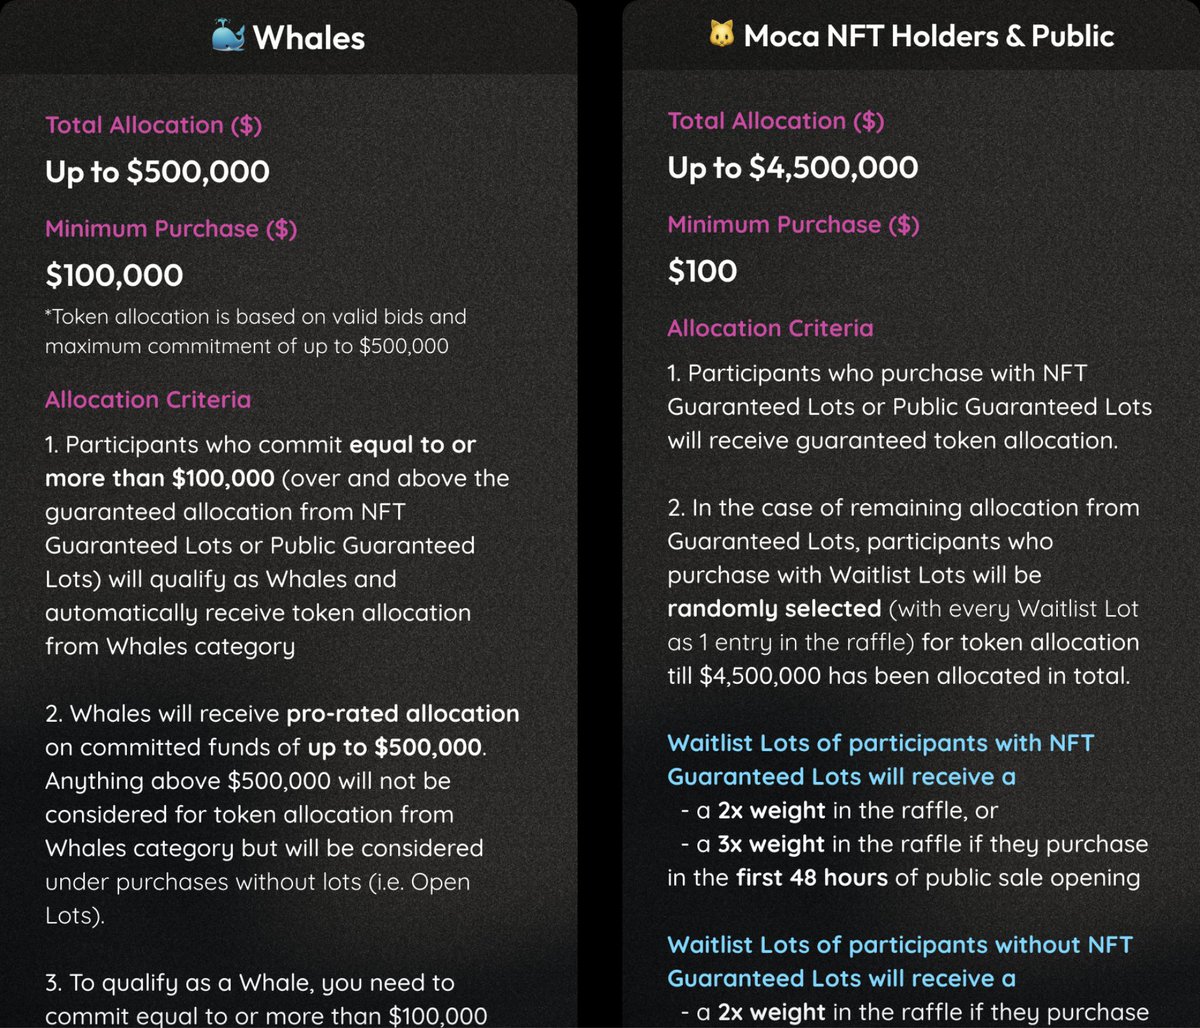 @CoinList is experimenting with tokensale formats. In the @MOCAFoundation sale, there is an option for Whales who can get a guaranteed distribution if they deposit $100,000 or more. But I have a question, in case of account banning and inability to withdraw funds just because…